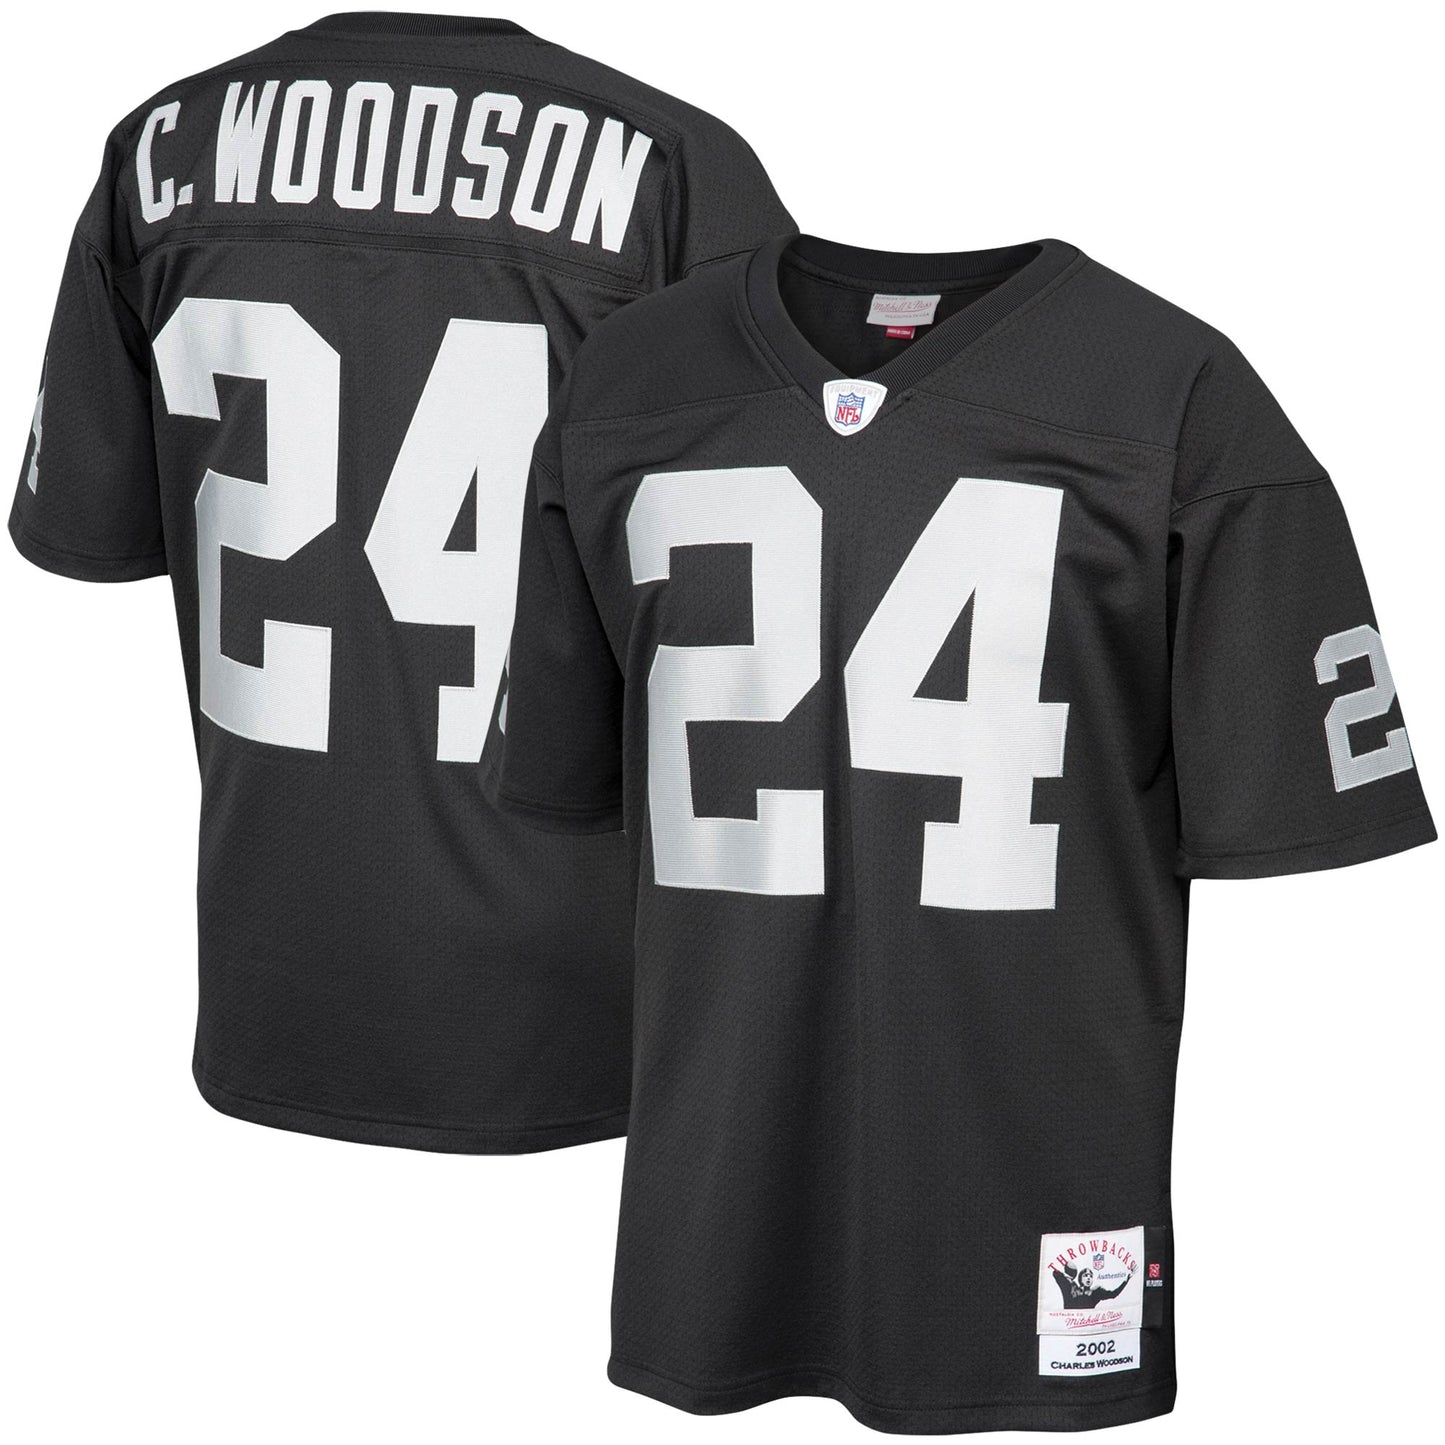 Charles Woodson Las Vegas Raiders Mitchell & Ness 2002 Authentic Throwback Retired Player Jersey - Black